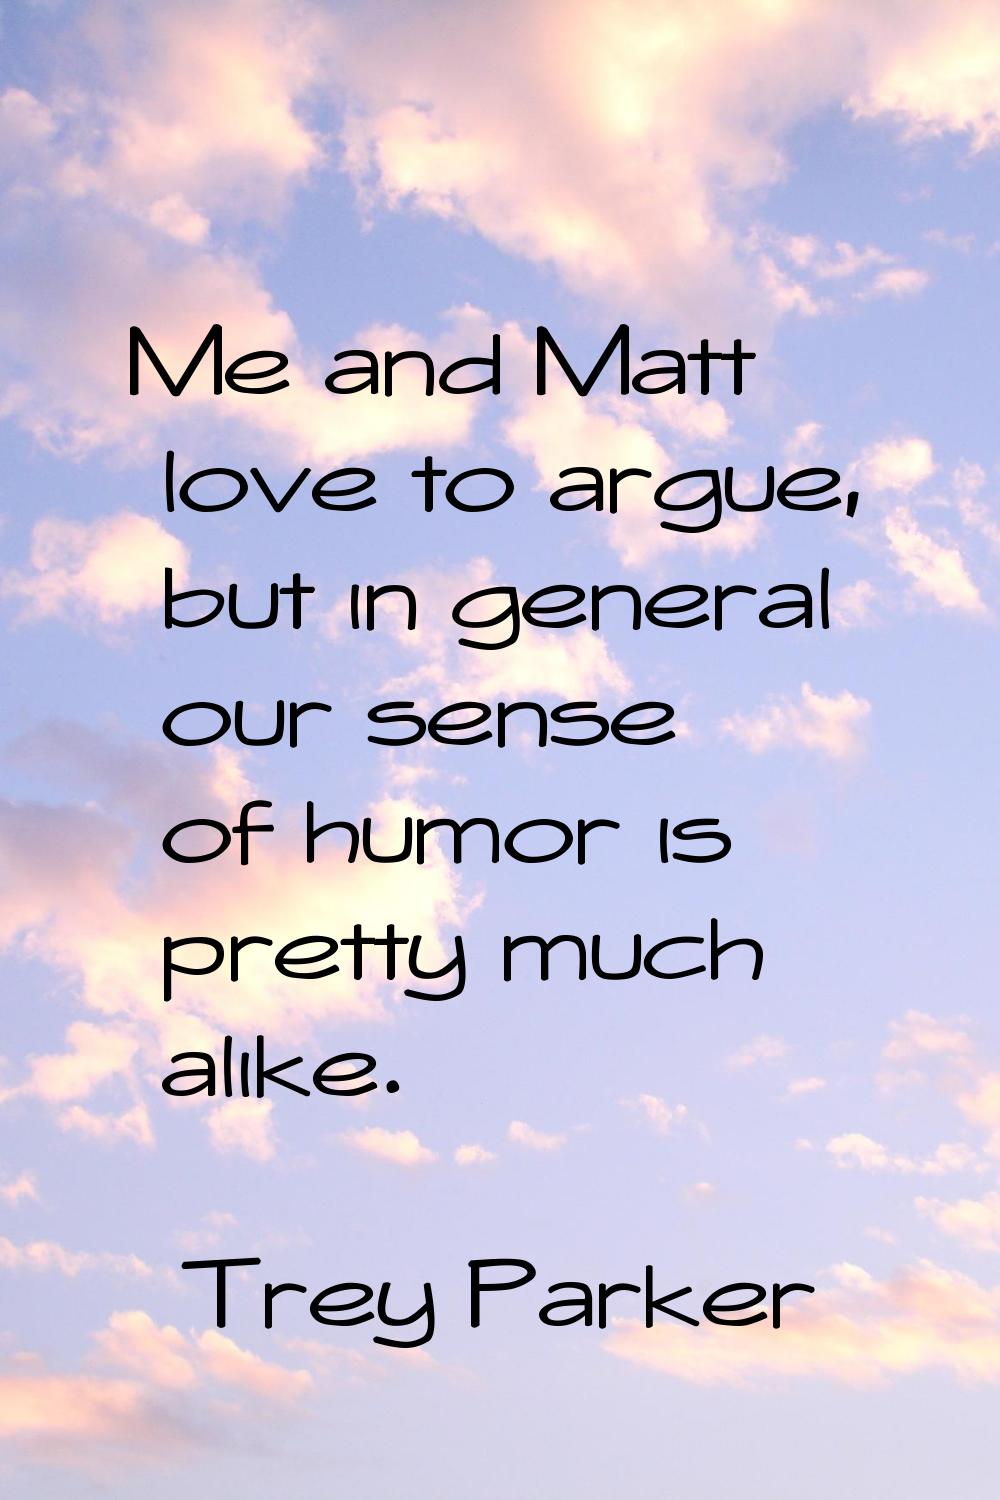 Me and Matt love to argue, but in general our sense of humor is pretty much alike.